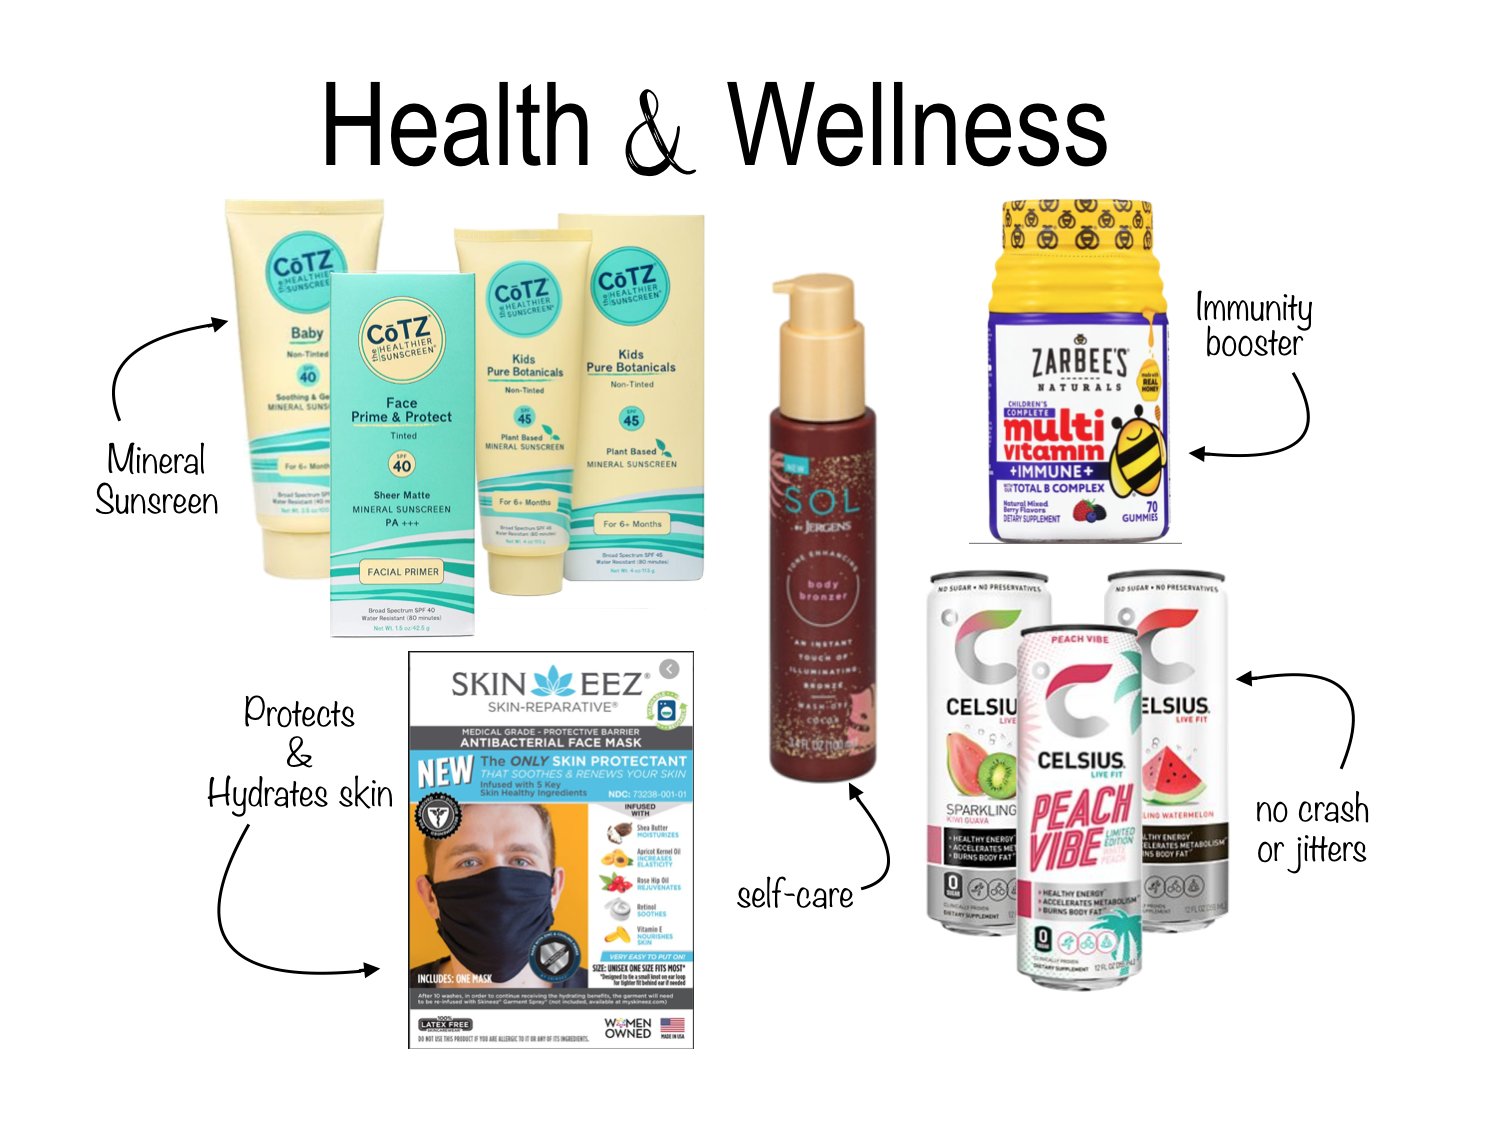 5 Home & Family Wellness Products For Feeling Our Best ...